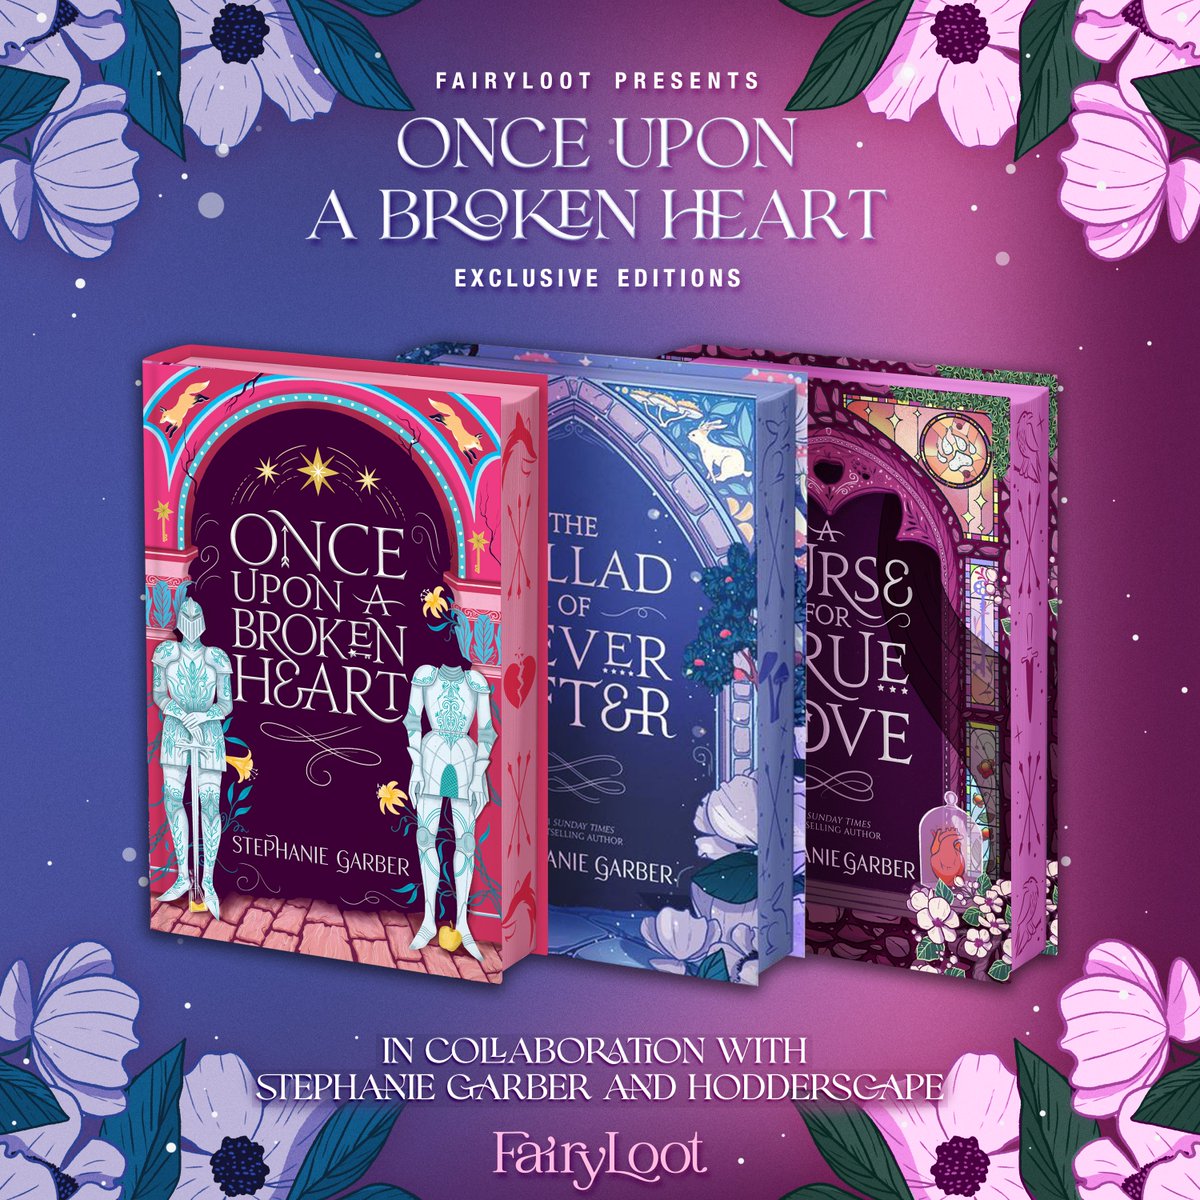 We are so thrilled to announce that we will be offering a second printing of… the ‘Once Upon A Broken Heart’ Exclusive Editions, brought to you in collaboration with Stephanie Garber and @hodderscape!